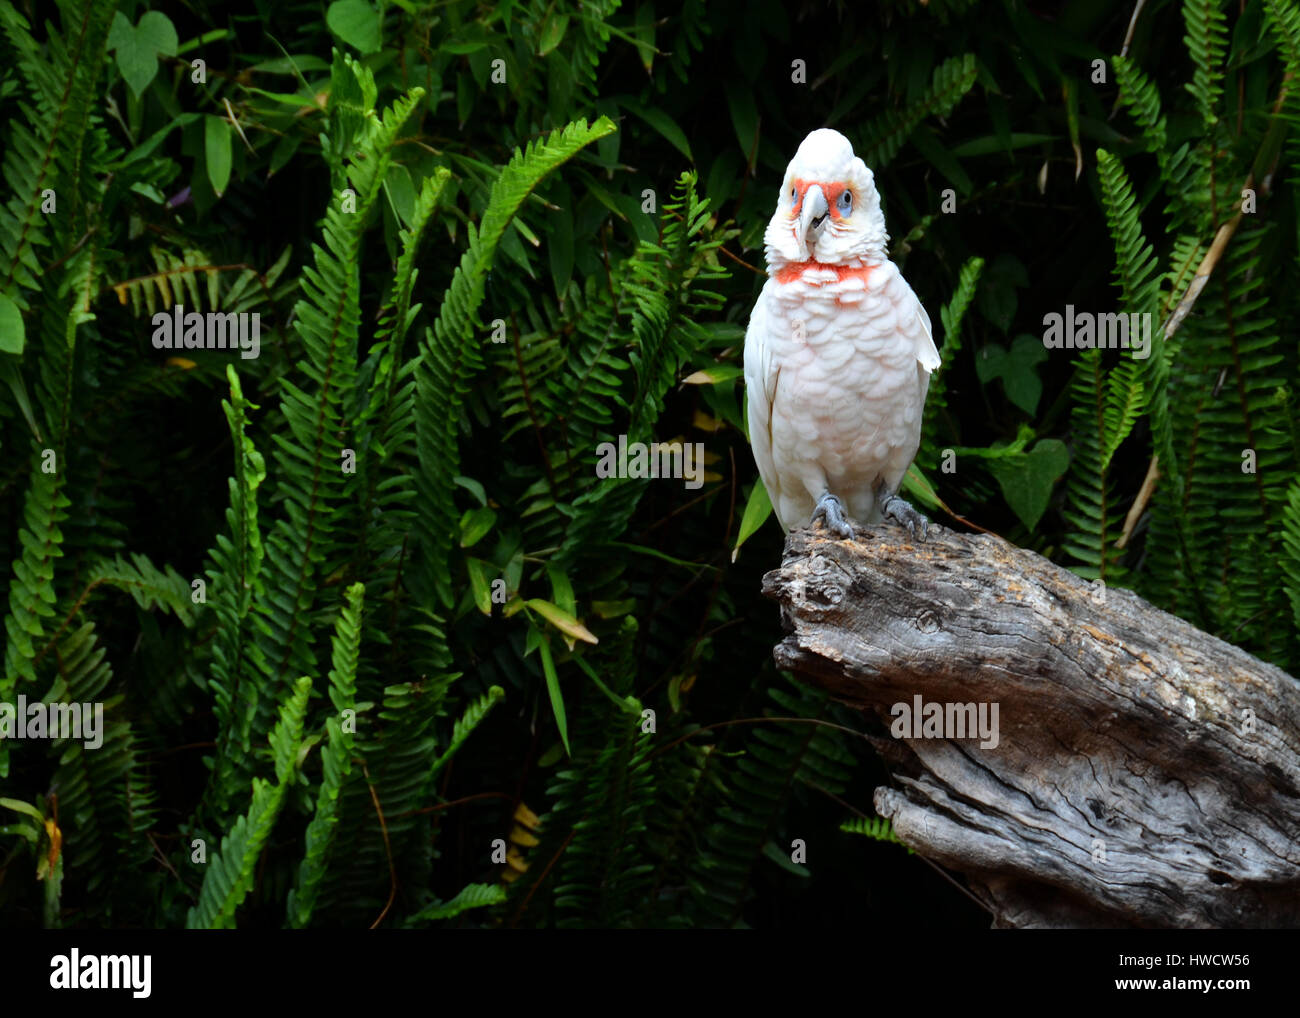 Long-billed Corella (cacatua tenuirostris). Portrait of a Catatua standing in a tree, isolated on green background forest. Stock Photo